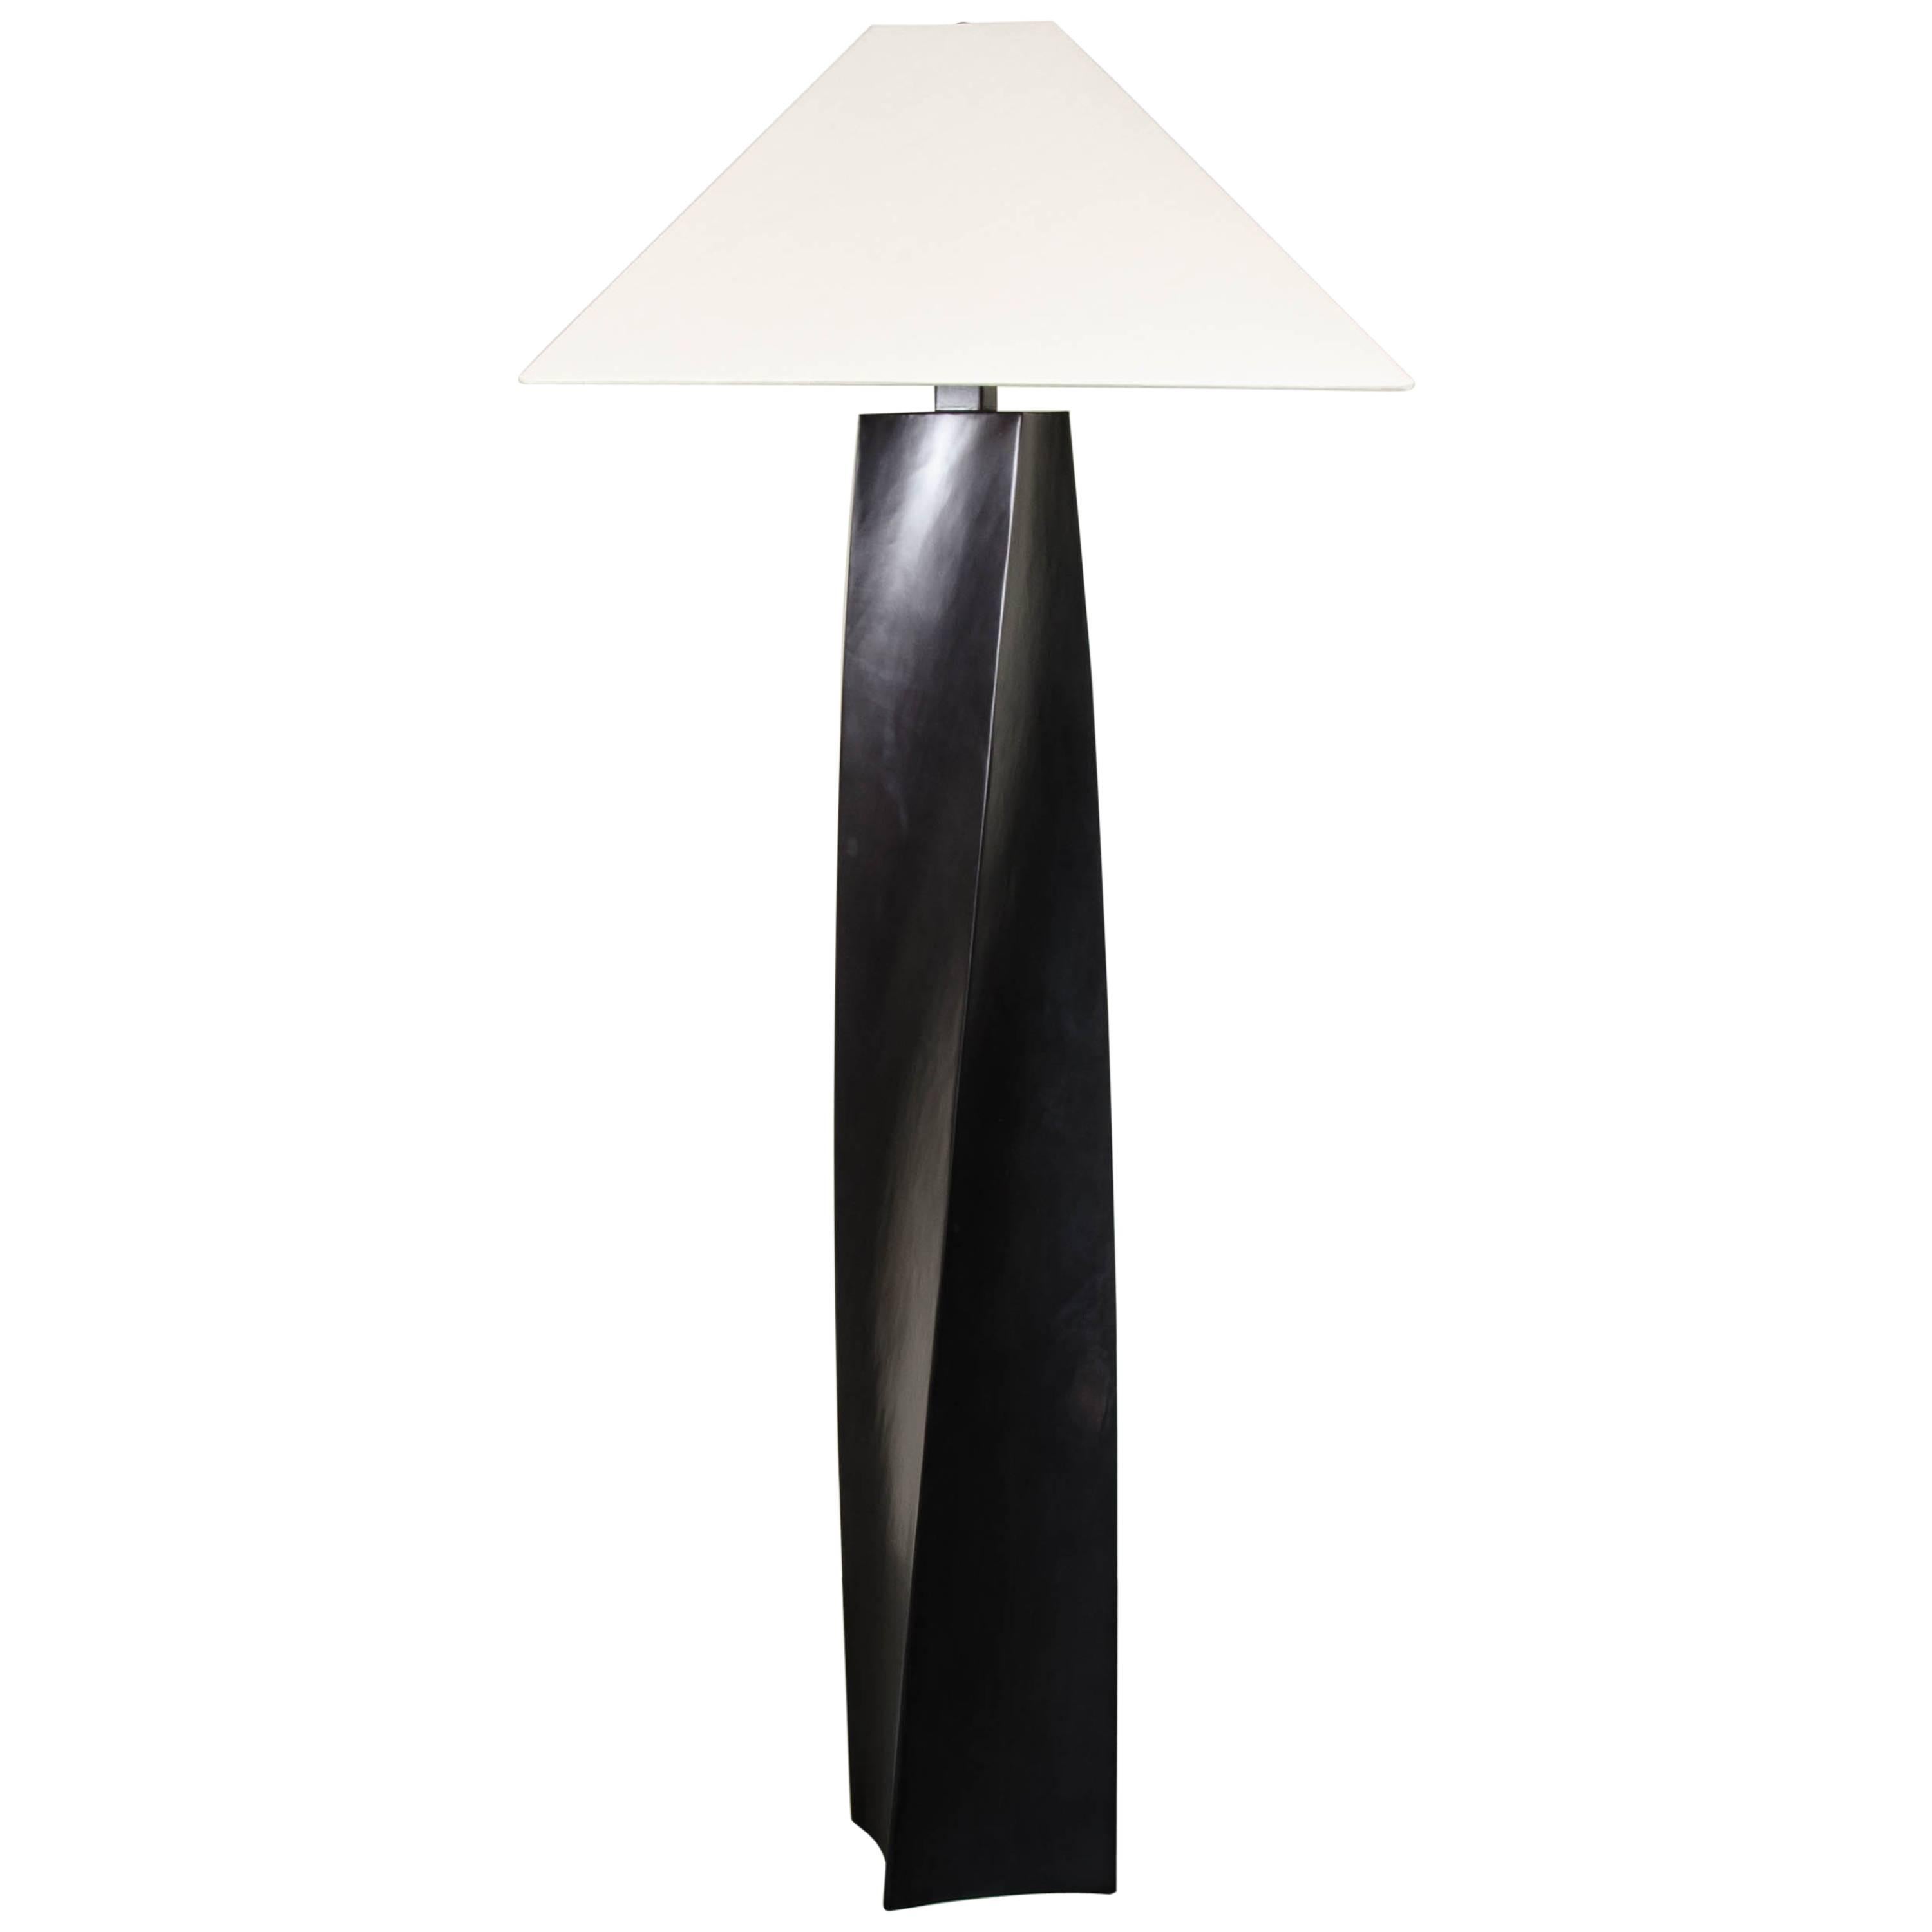 Helix Floor Lamp, Black Copper by Robert Kuo, Limited Edition For Sale